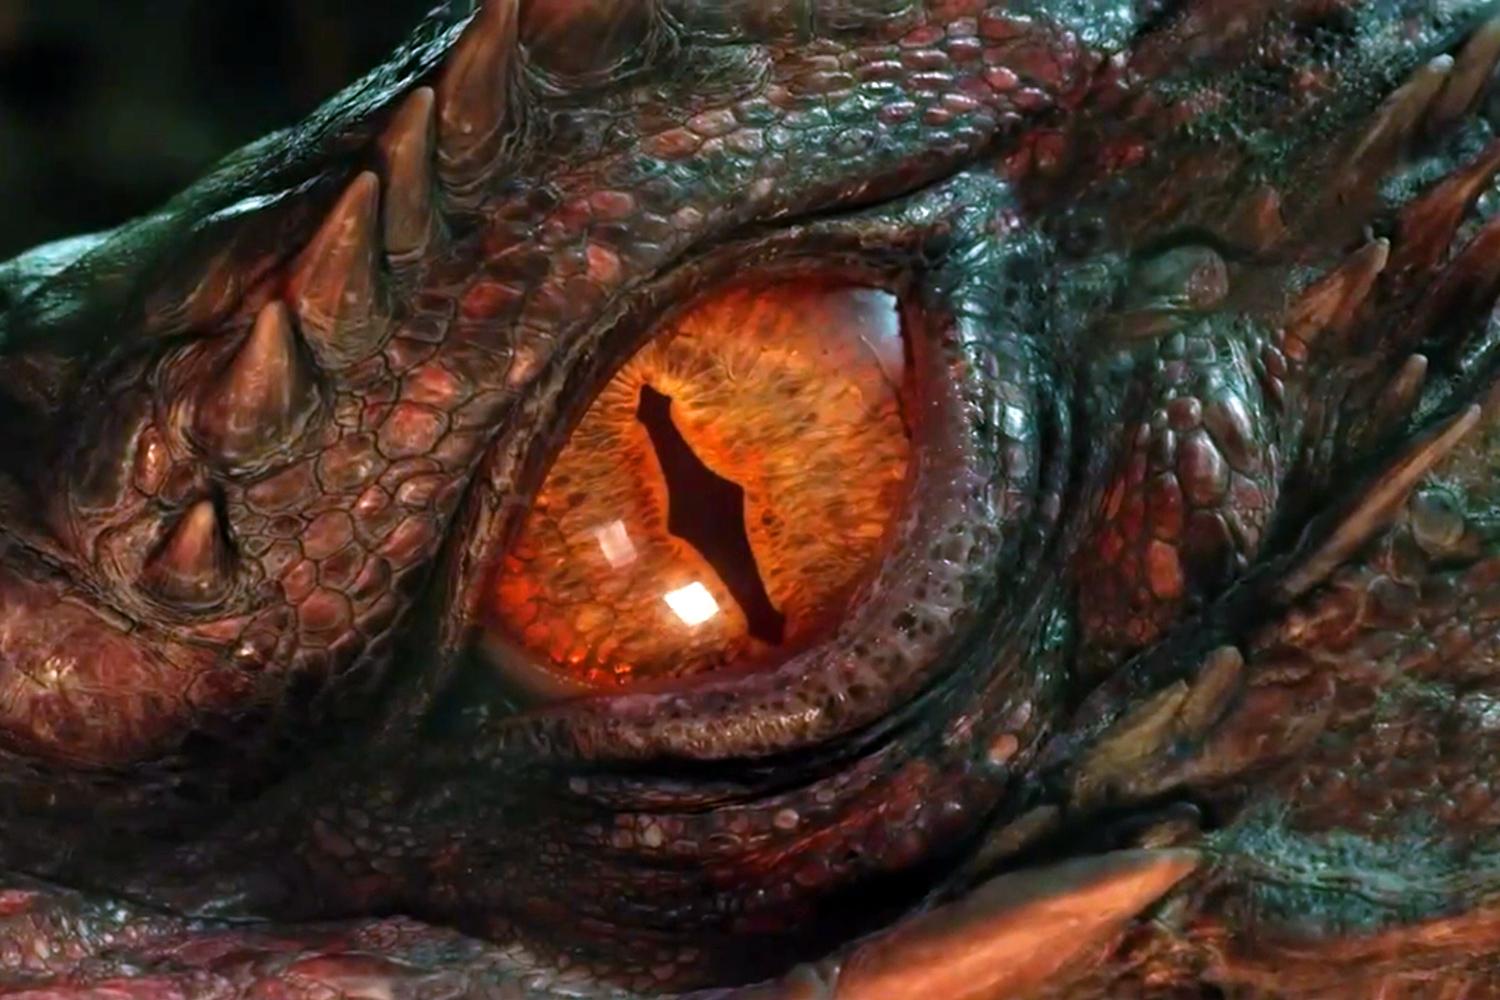 In Sir Peter Jackson S Hobbit Trilogy The Desolation Of Smaug